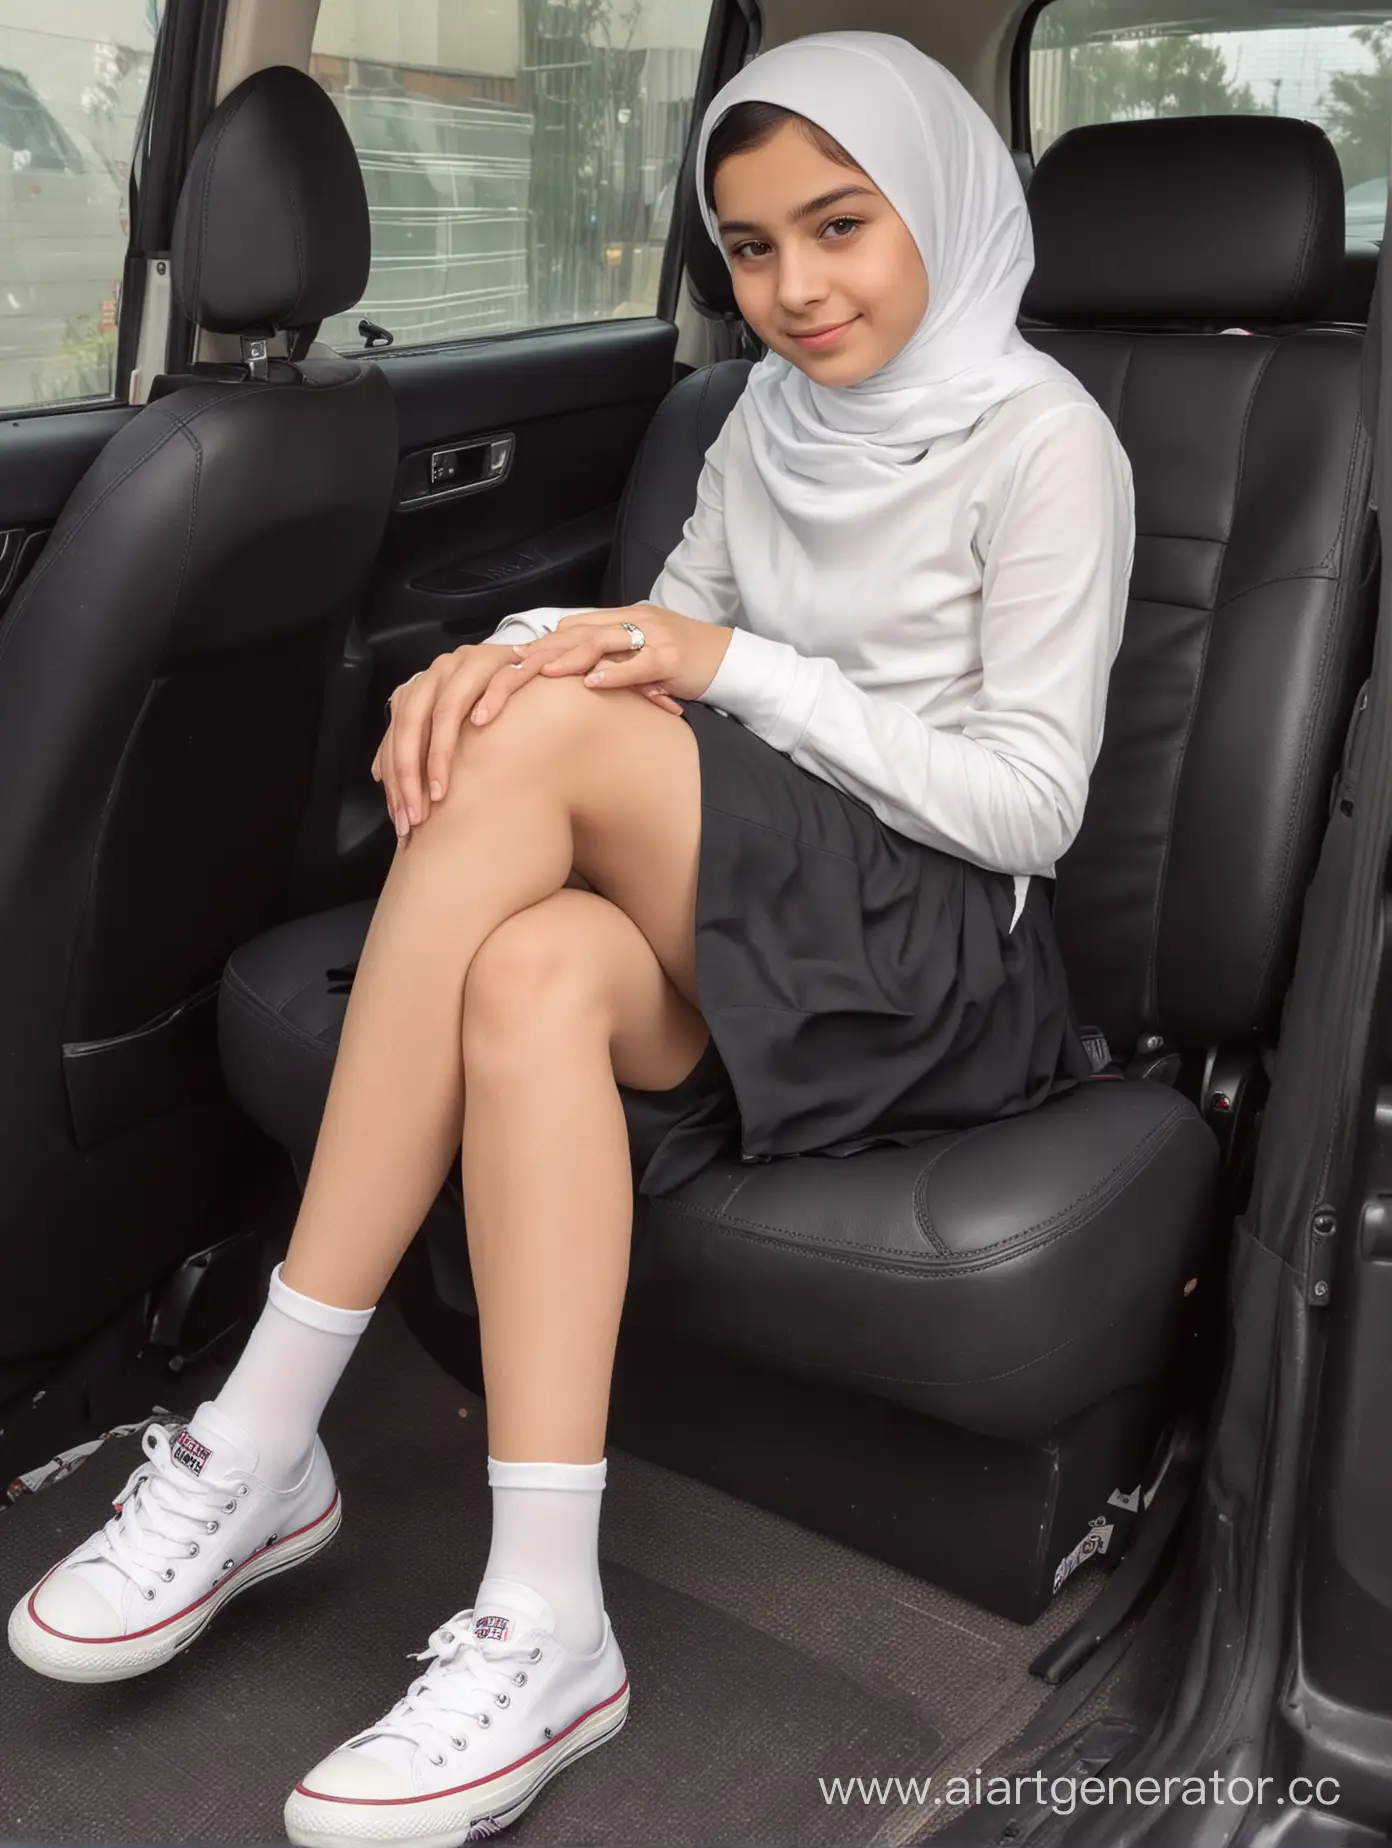 A little girl, 12 years old, hijab, mini school skirt, white short converse shoes, school uniform, black opaque tights, sits car seat, from side, top view, turkish